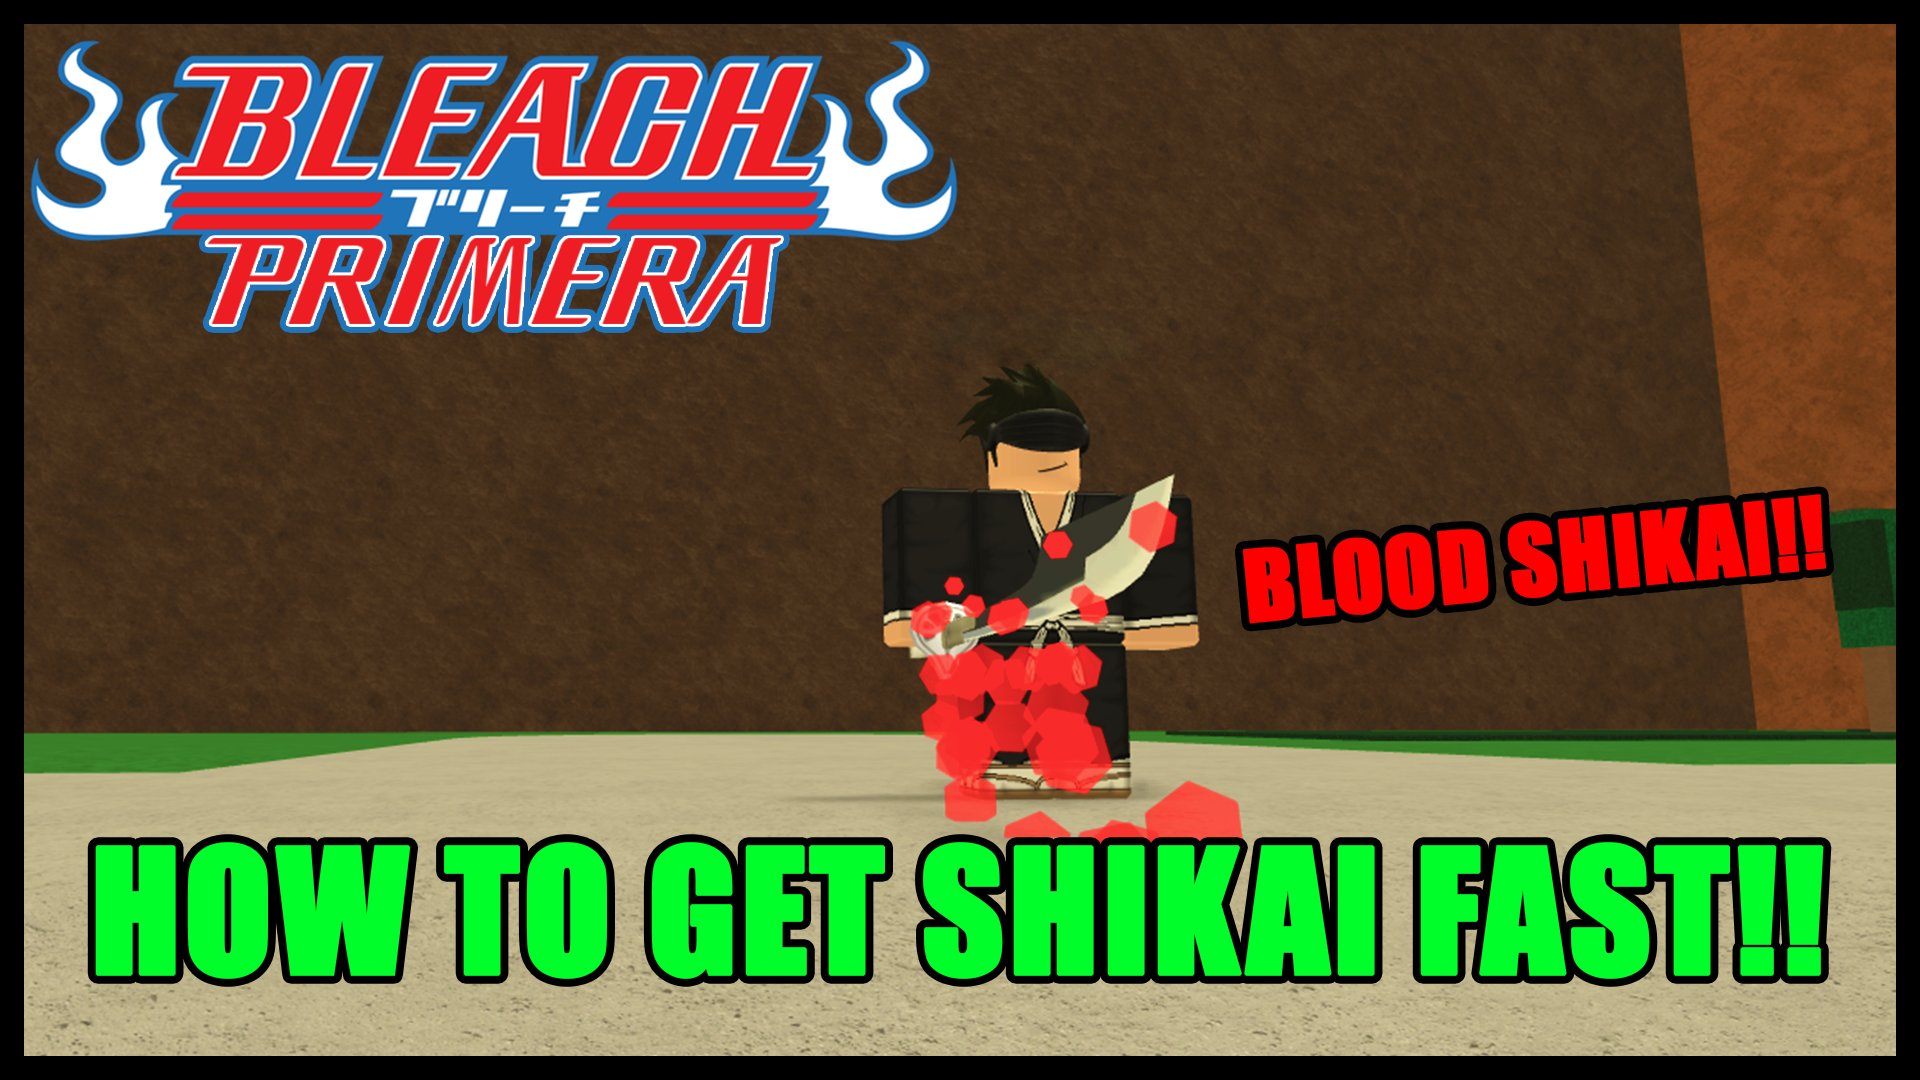 Spy Space On Twitter New Video Bleach Primera Roblox How To Get Shikai For Those Having Issues Hopes It Helps You Guys Https T Co 4pdqhq3g1b Roblox Robloxdev Https T Co Kzebzrwa7p - roblox bleach primera script